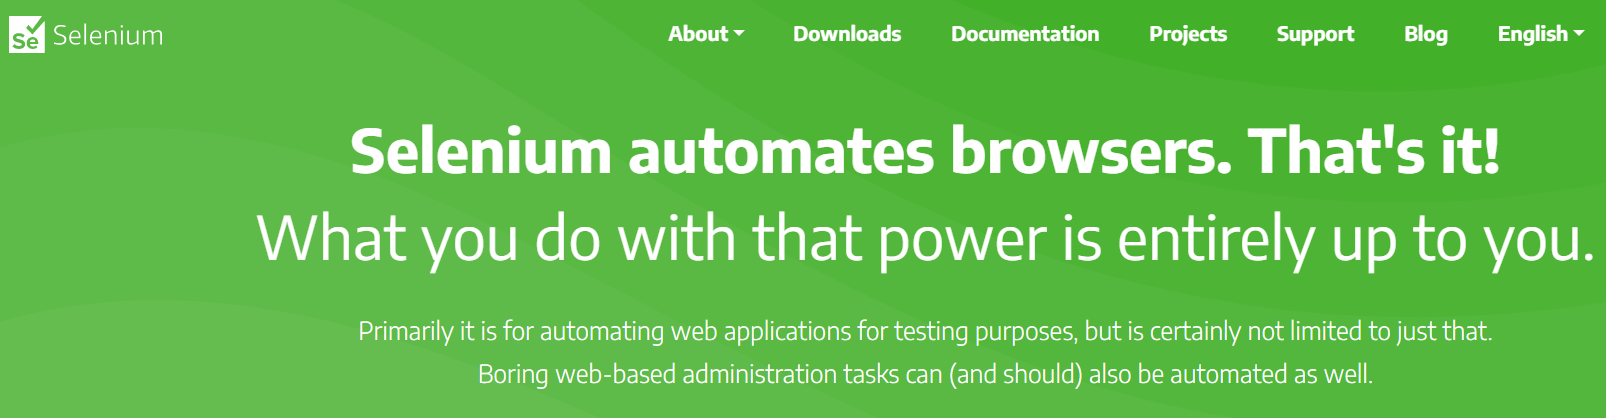 Selenium - one of the best popular automation testing tools for web applications